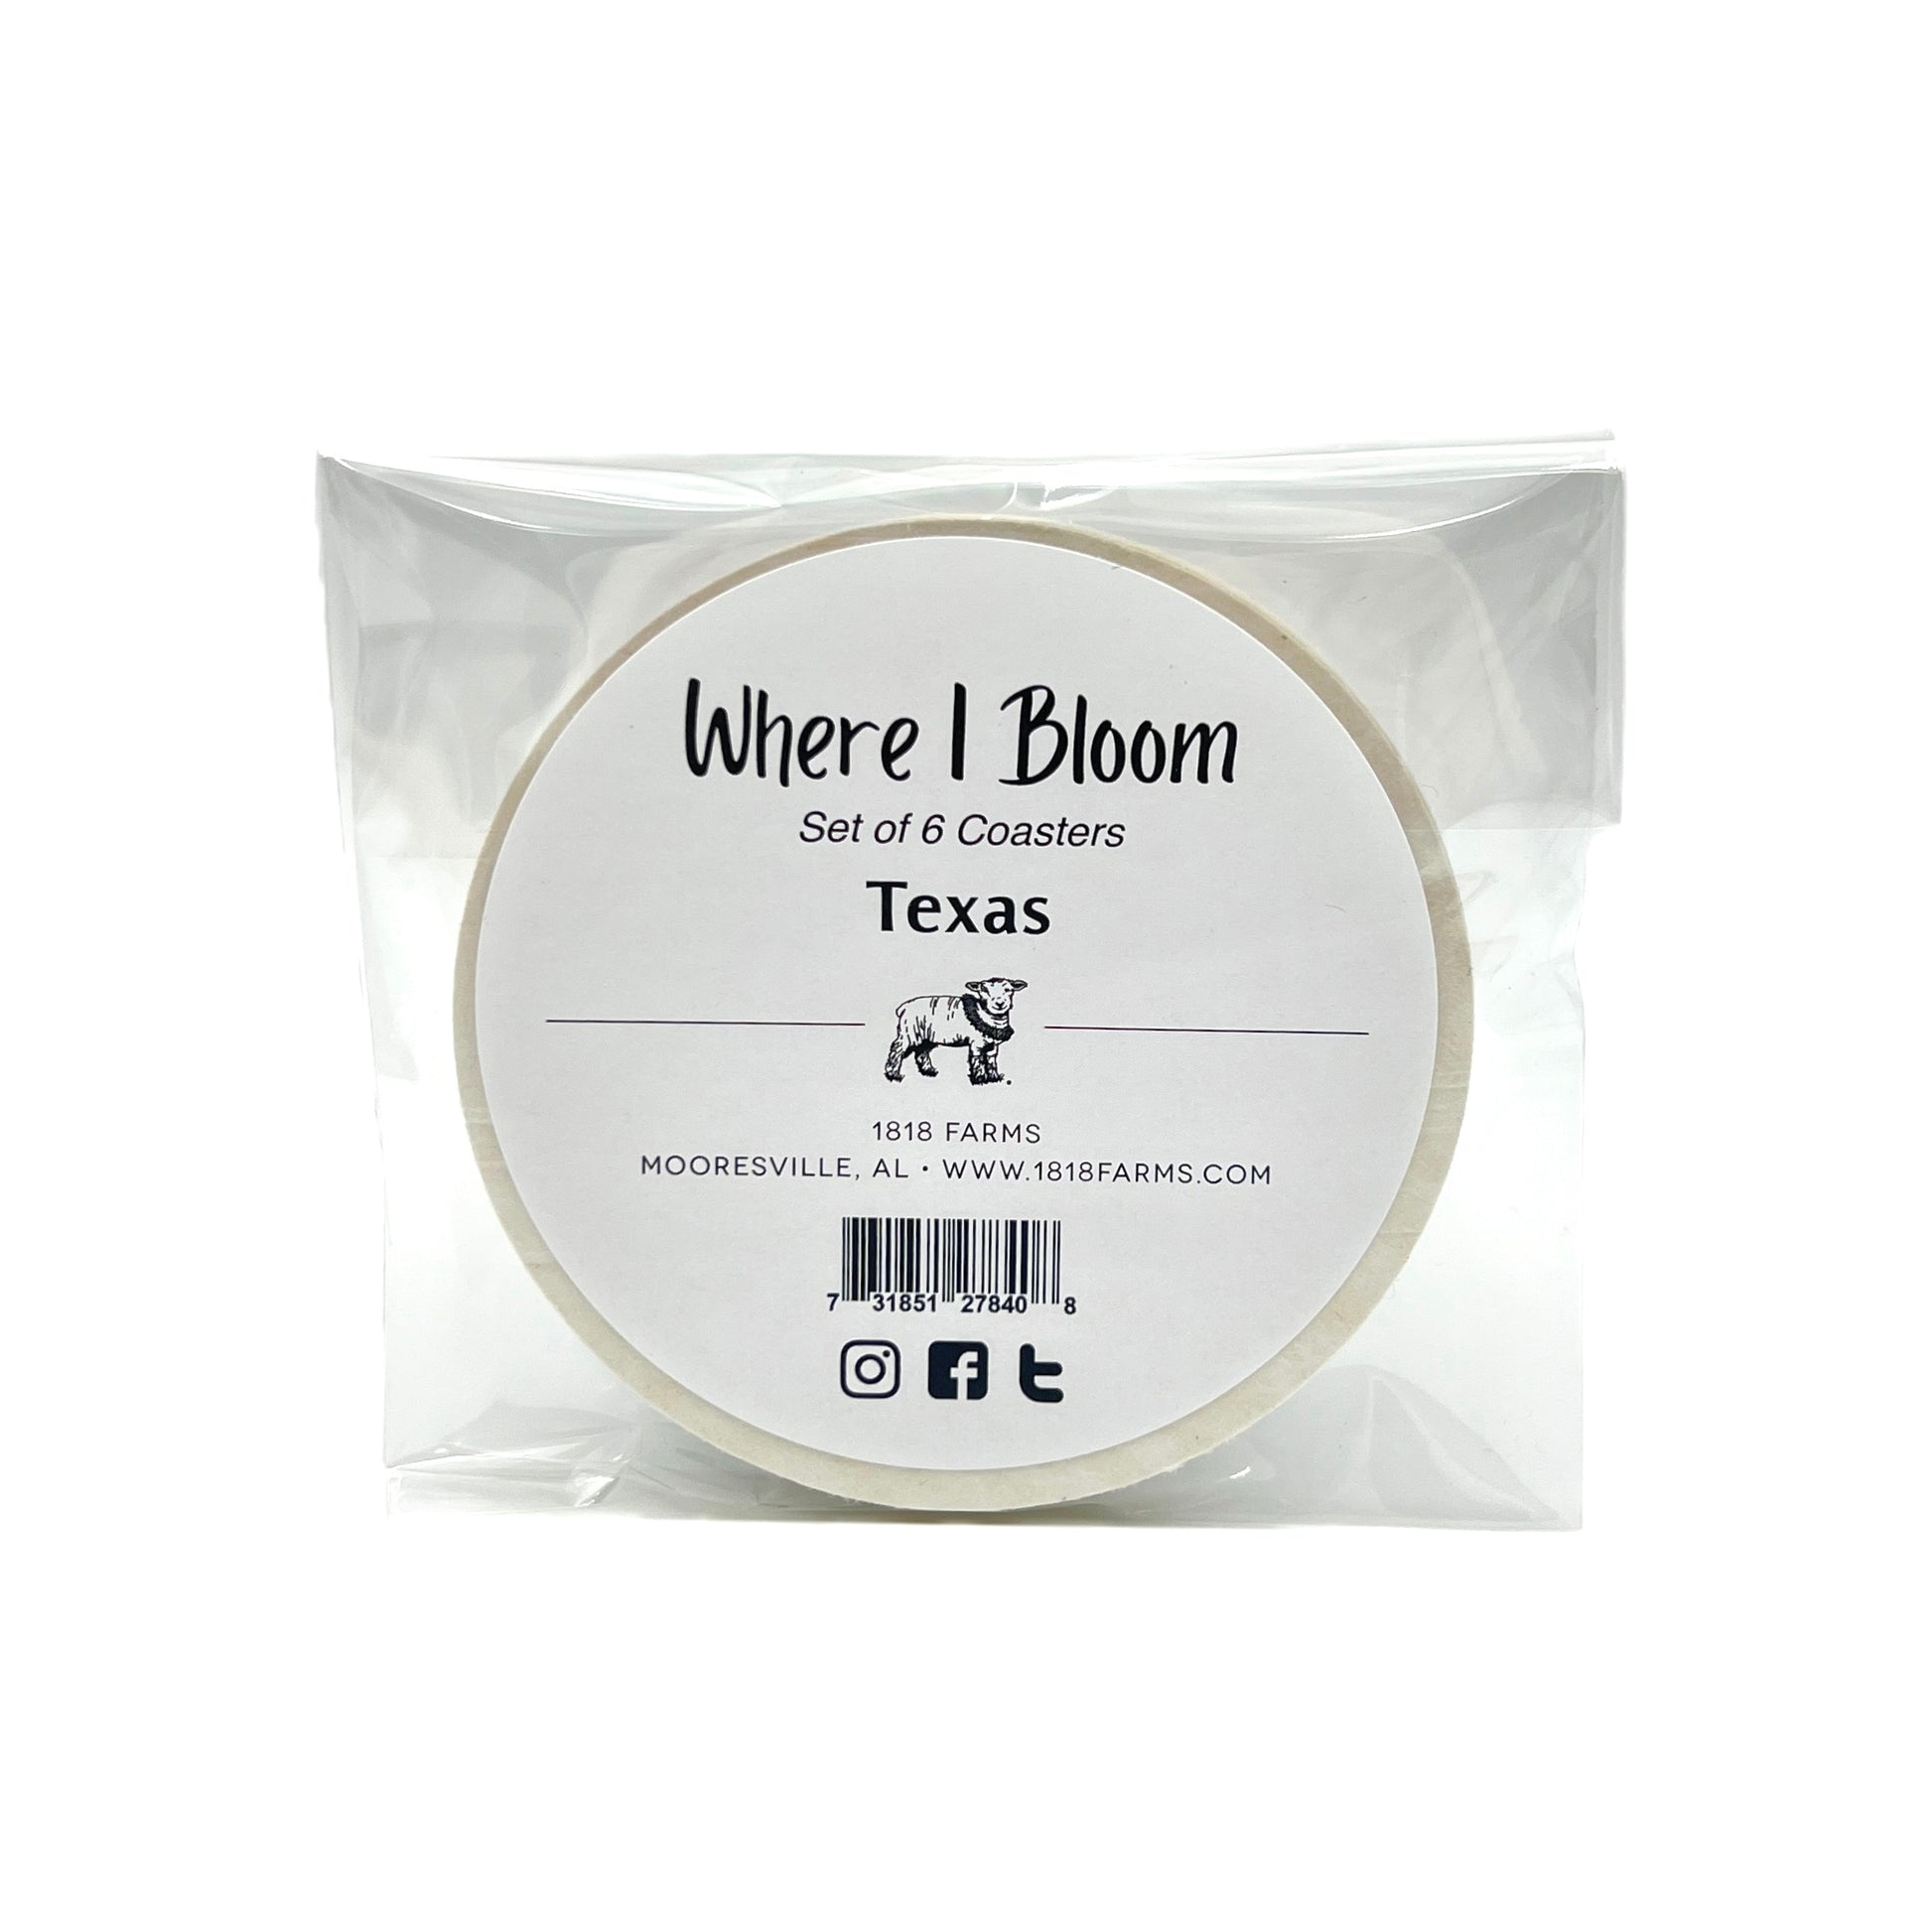 State Themed Drink Coasters (Set of 6) Featuring Dried, Pressed Flowers - "Where I Bloom" Collection Coaster 1818 Farms   